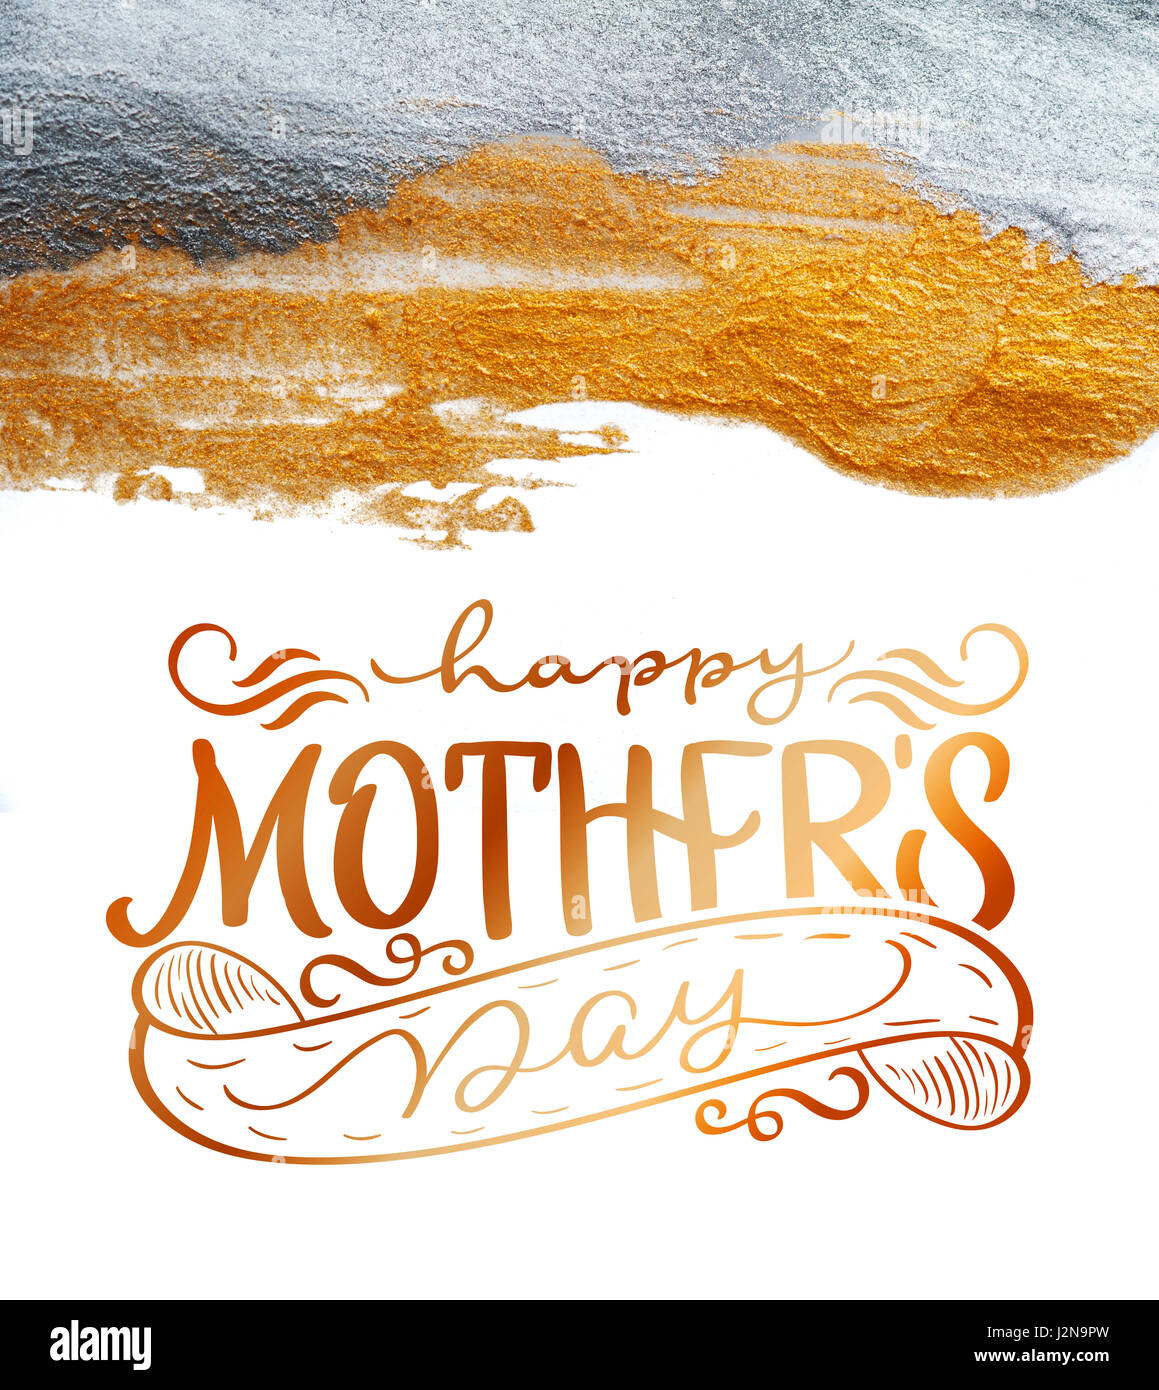 Abstract golden and silver background with a brush of acrylic paint on paper and text Happy mothers day. Calligraphy lettering hand draw Stock Photo